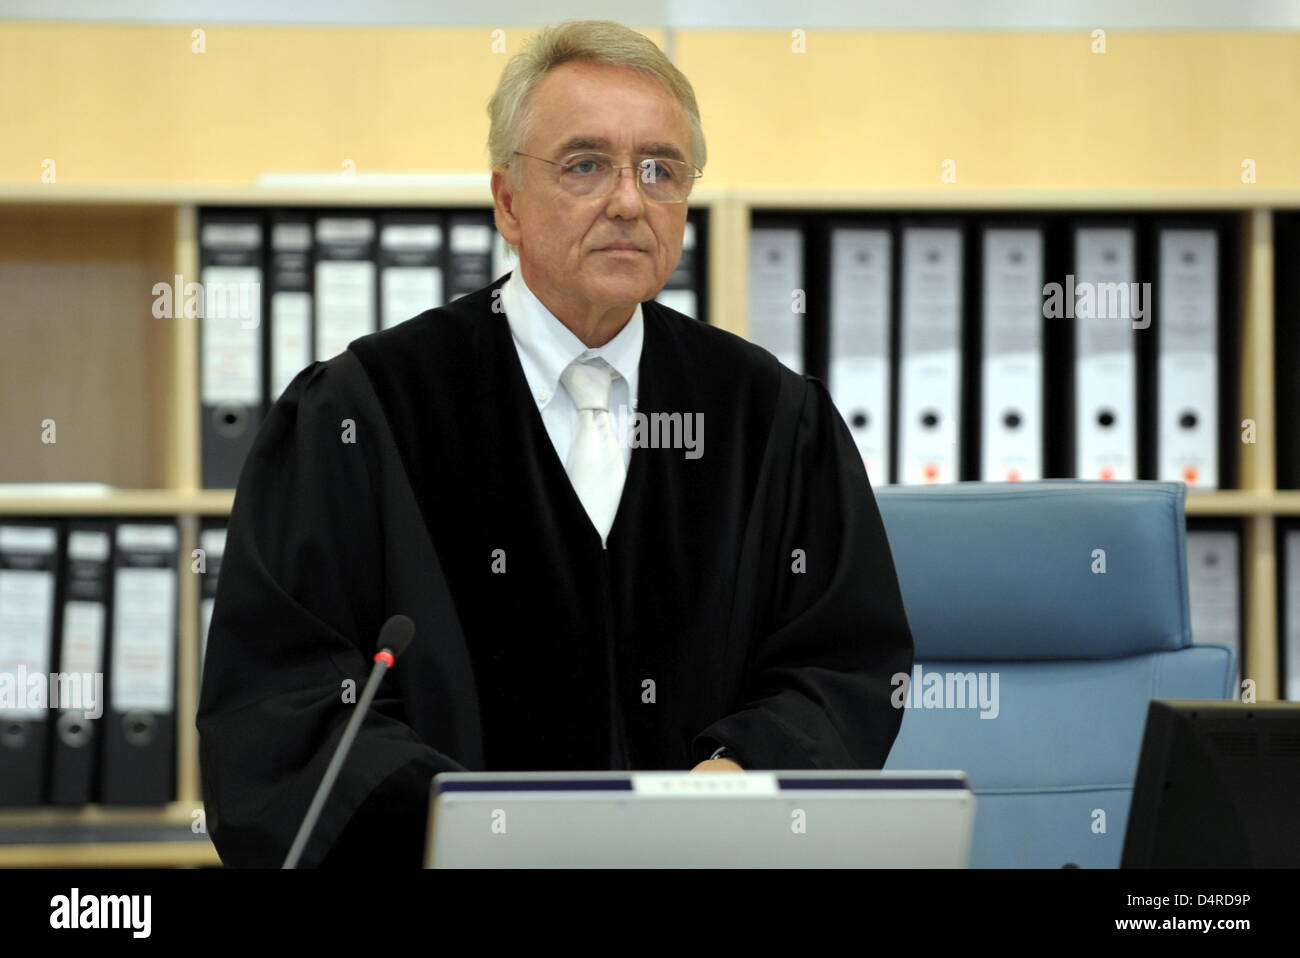 Chief judge Ottmar Breidling stands in the court room at the Higher Regional Court in Duesseldorf, Germany, 10 August 2009. The defendants in the terror trial against the so-called ?Sauerland group? kept their word and started making broad confessions. The four men already had more than 1000 pages of confessions recorded in custody in the last few weeks. Photo: FEDERICO GAMBARINI Stock Photo